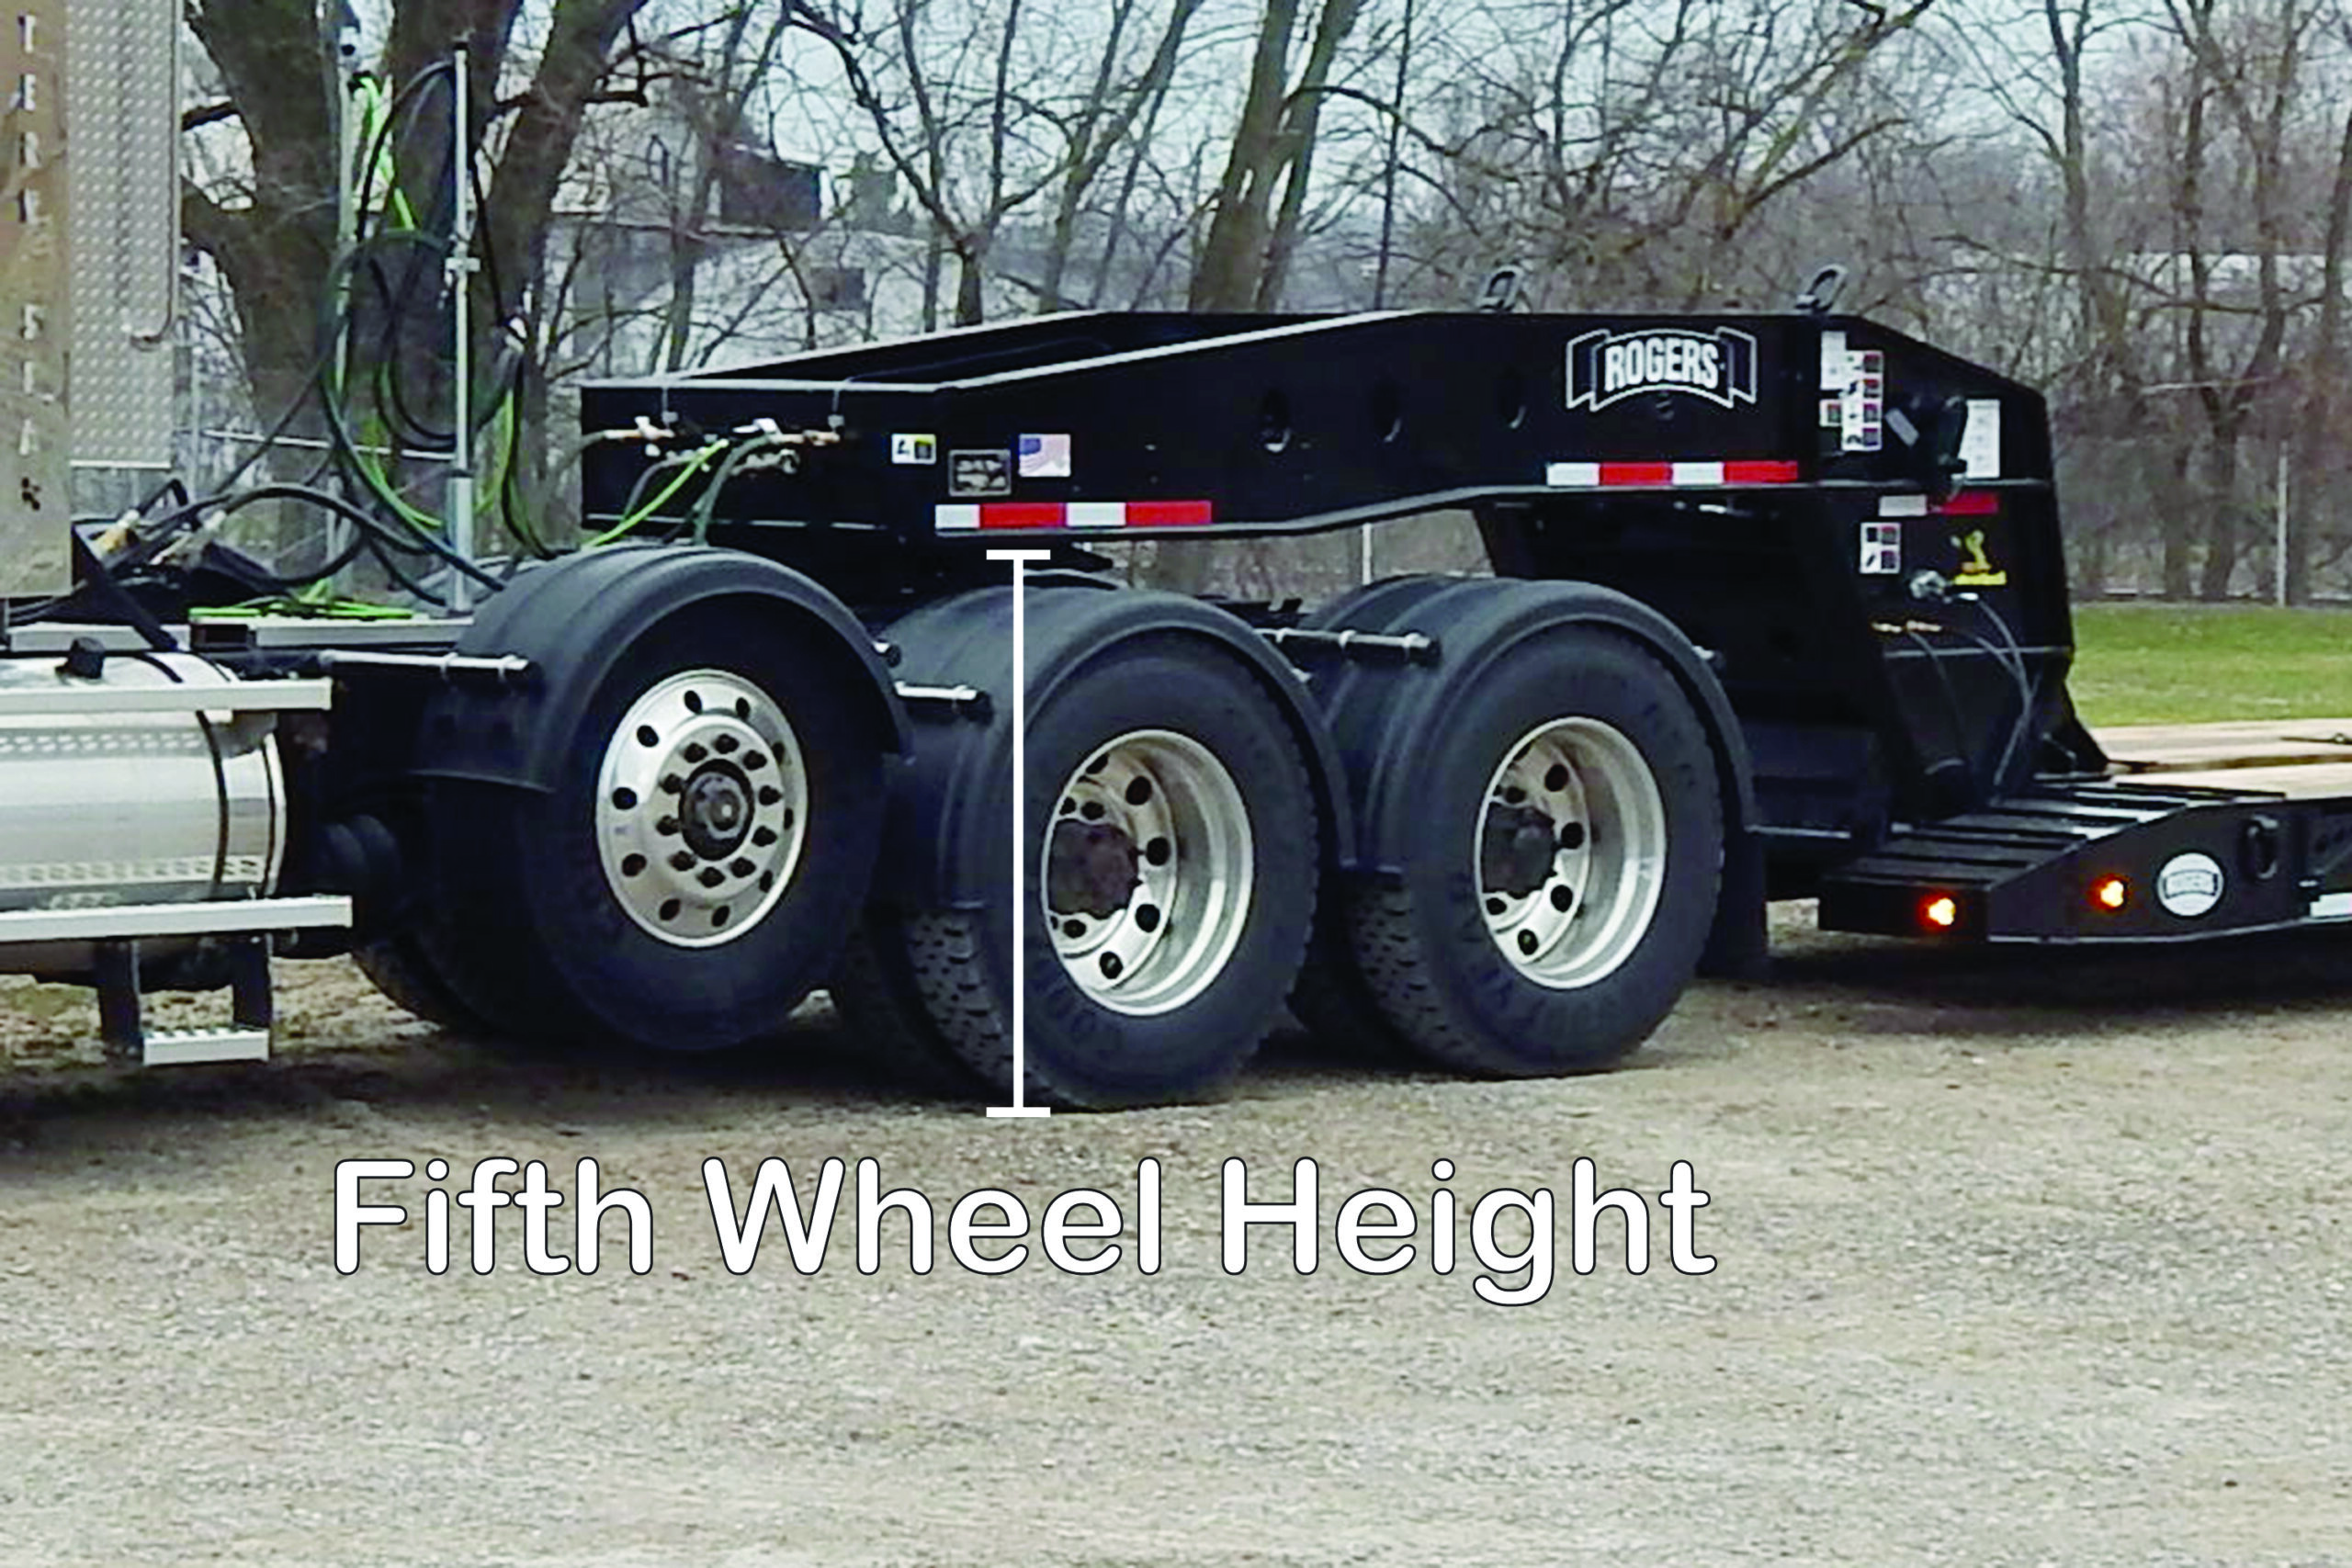 How to Measure 5Th Wheel Height